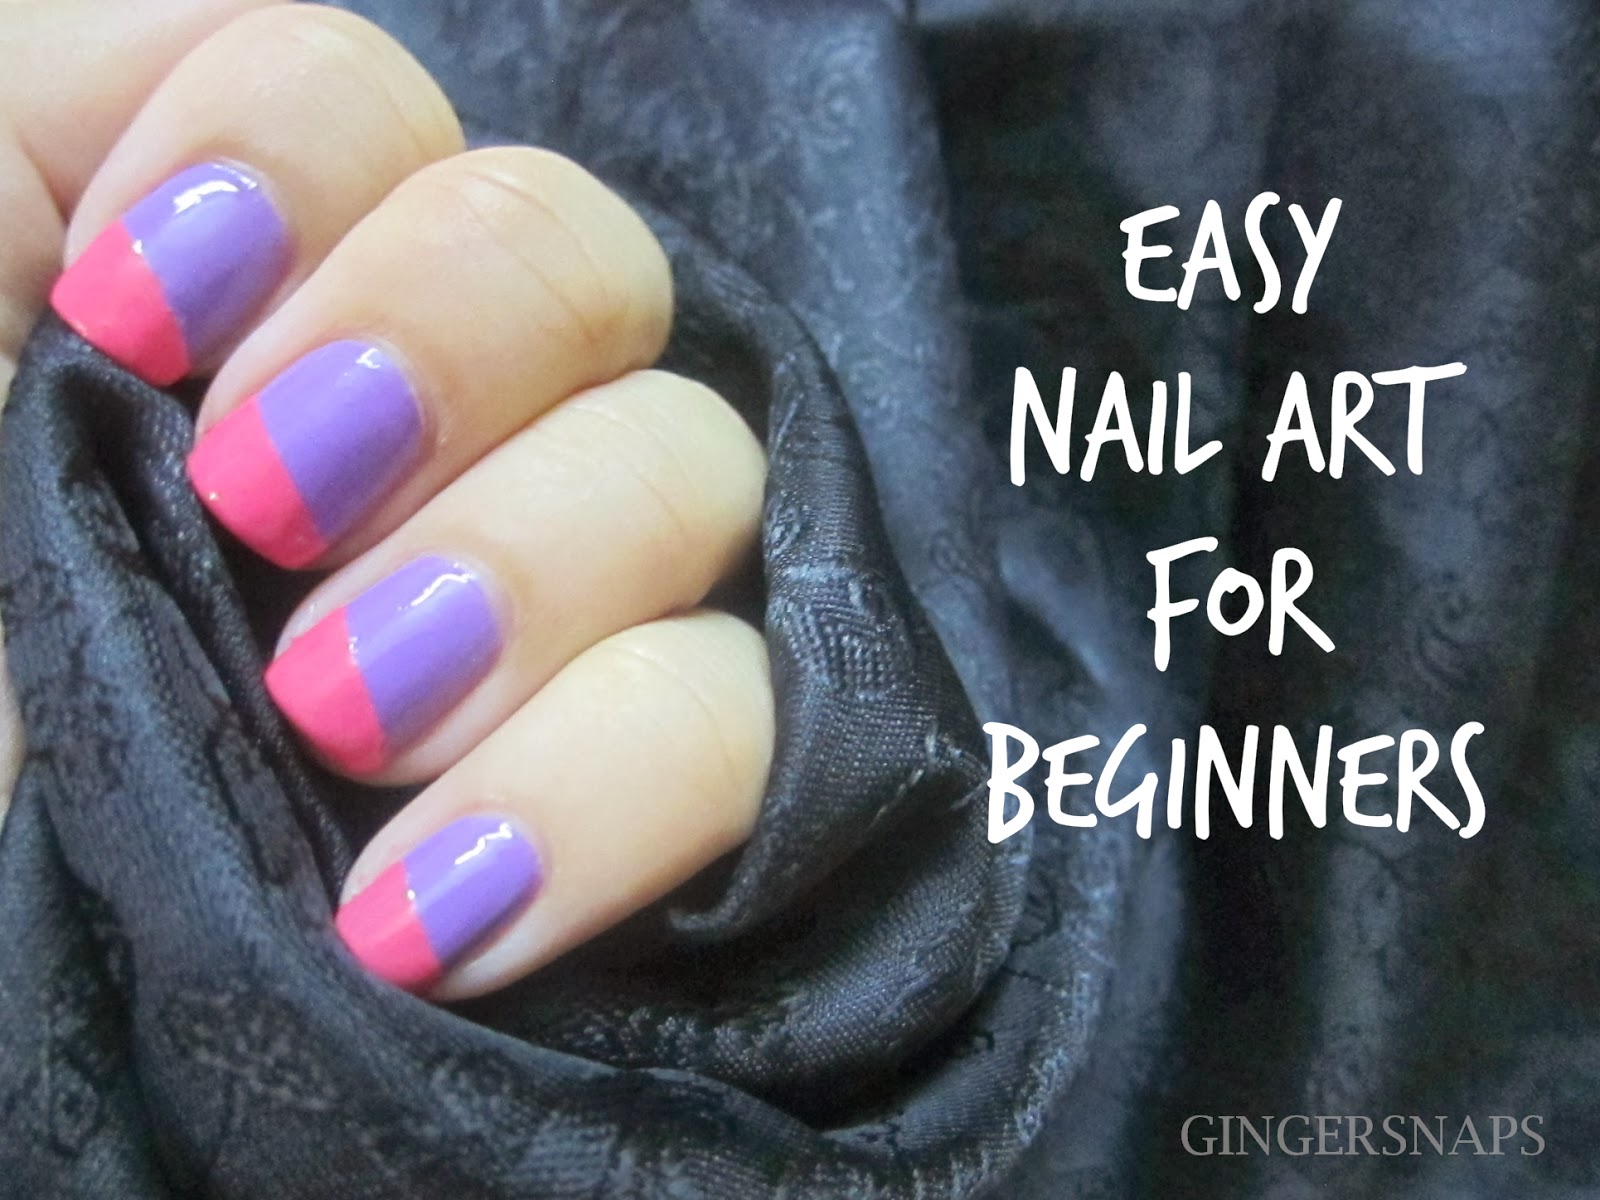 4. Smoky Nail Art for Beginners - wide 6